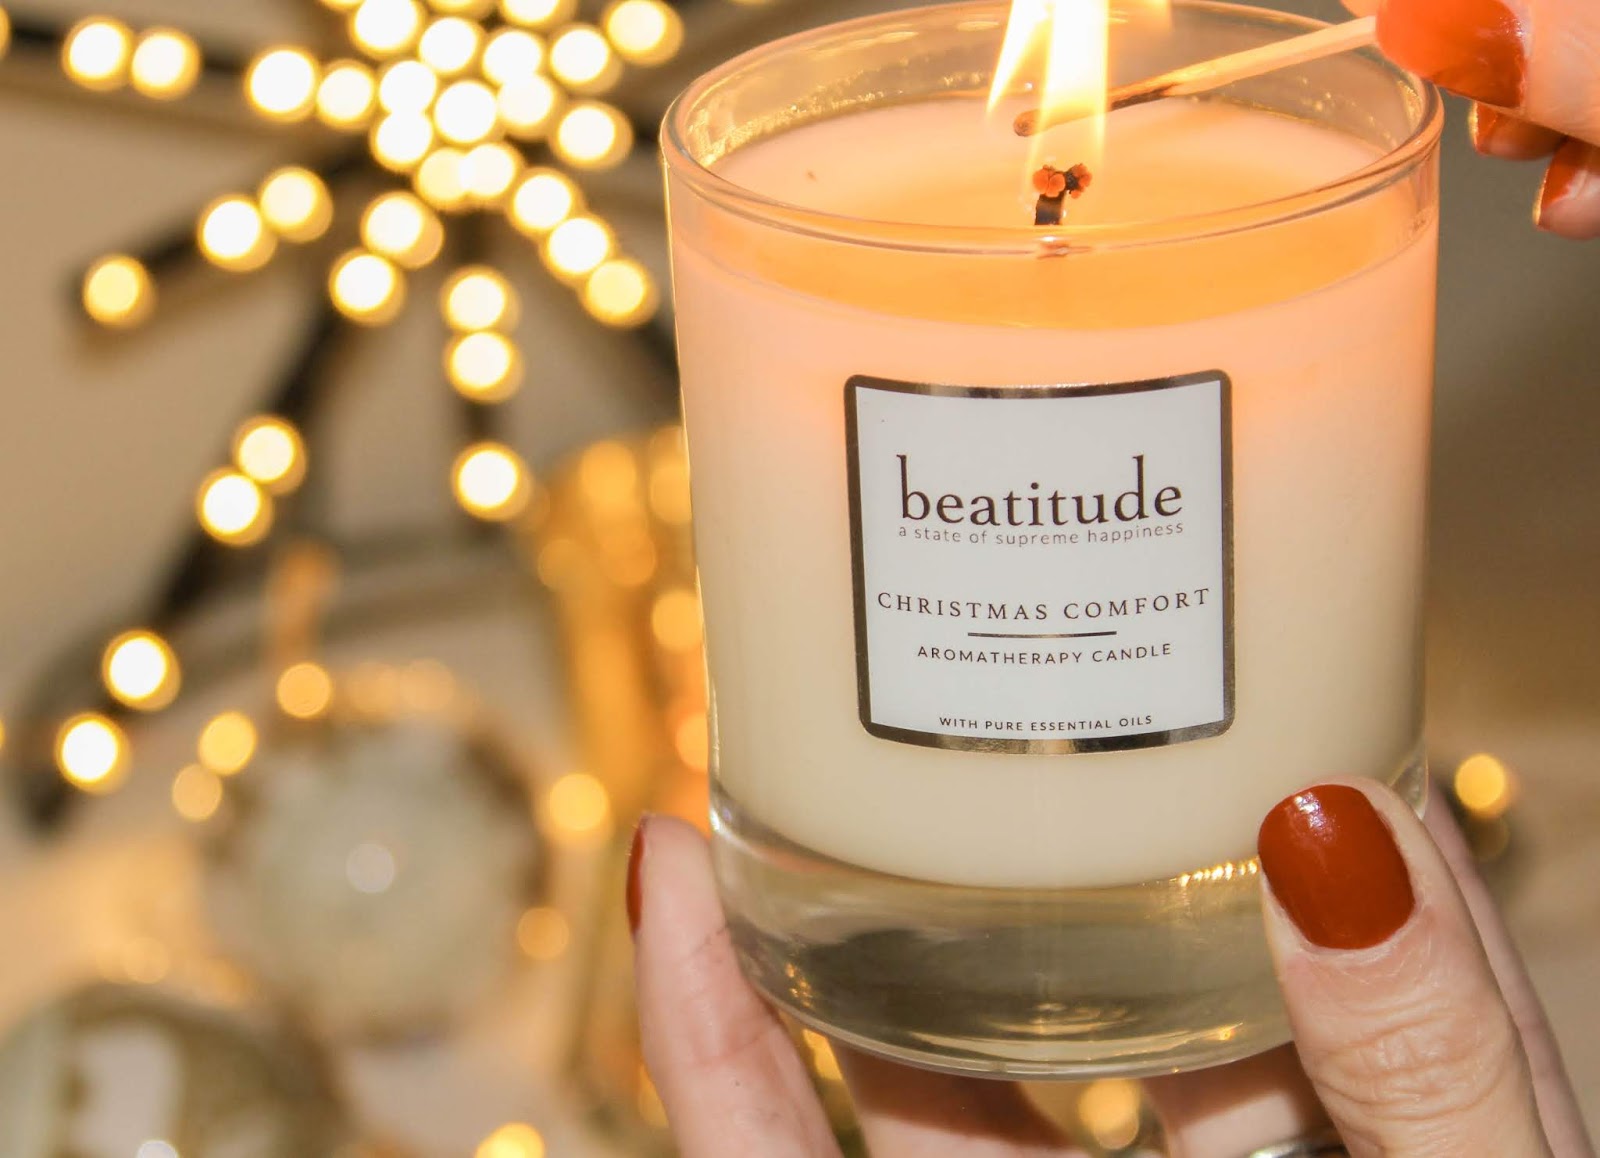 Fill Your Home With Festive Fragrance: The Scented Candles I'm Loving (And Lusting After) This Christmas